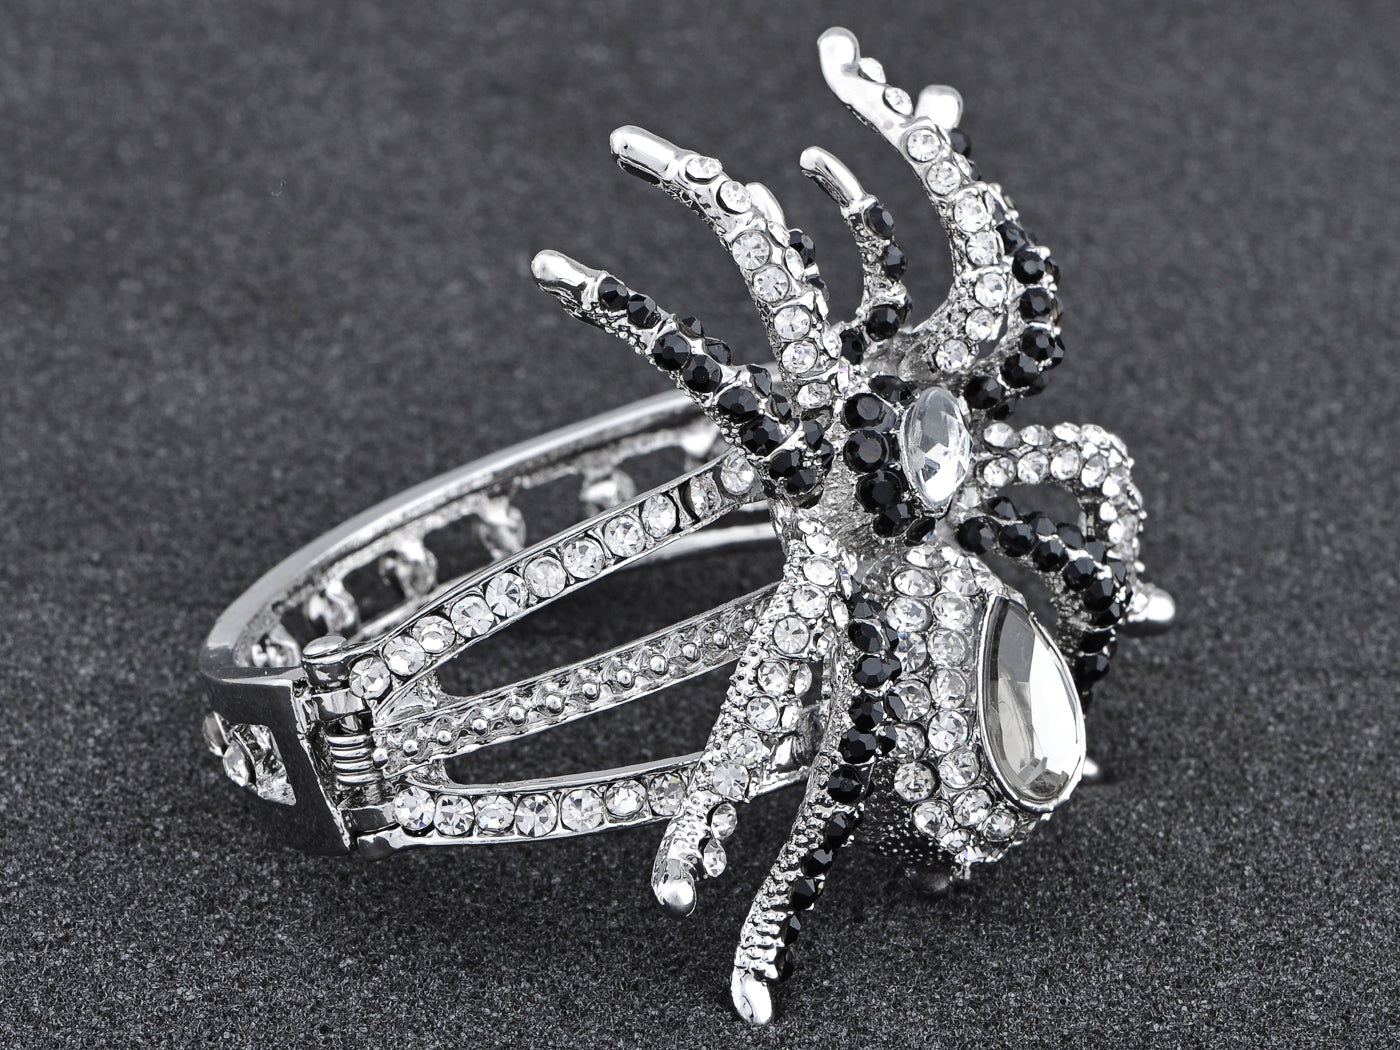 Insect Spider Cuff Bracelet Bangles